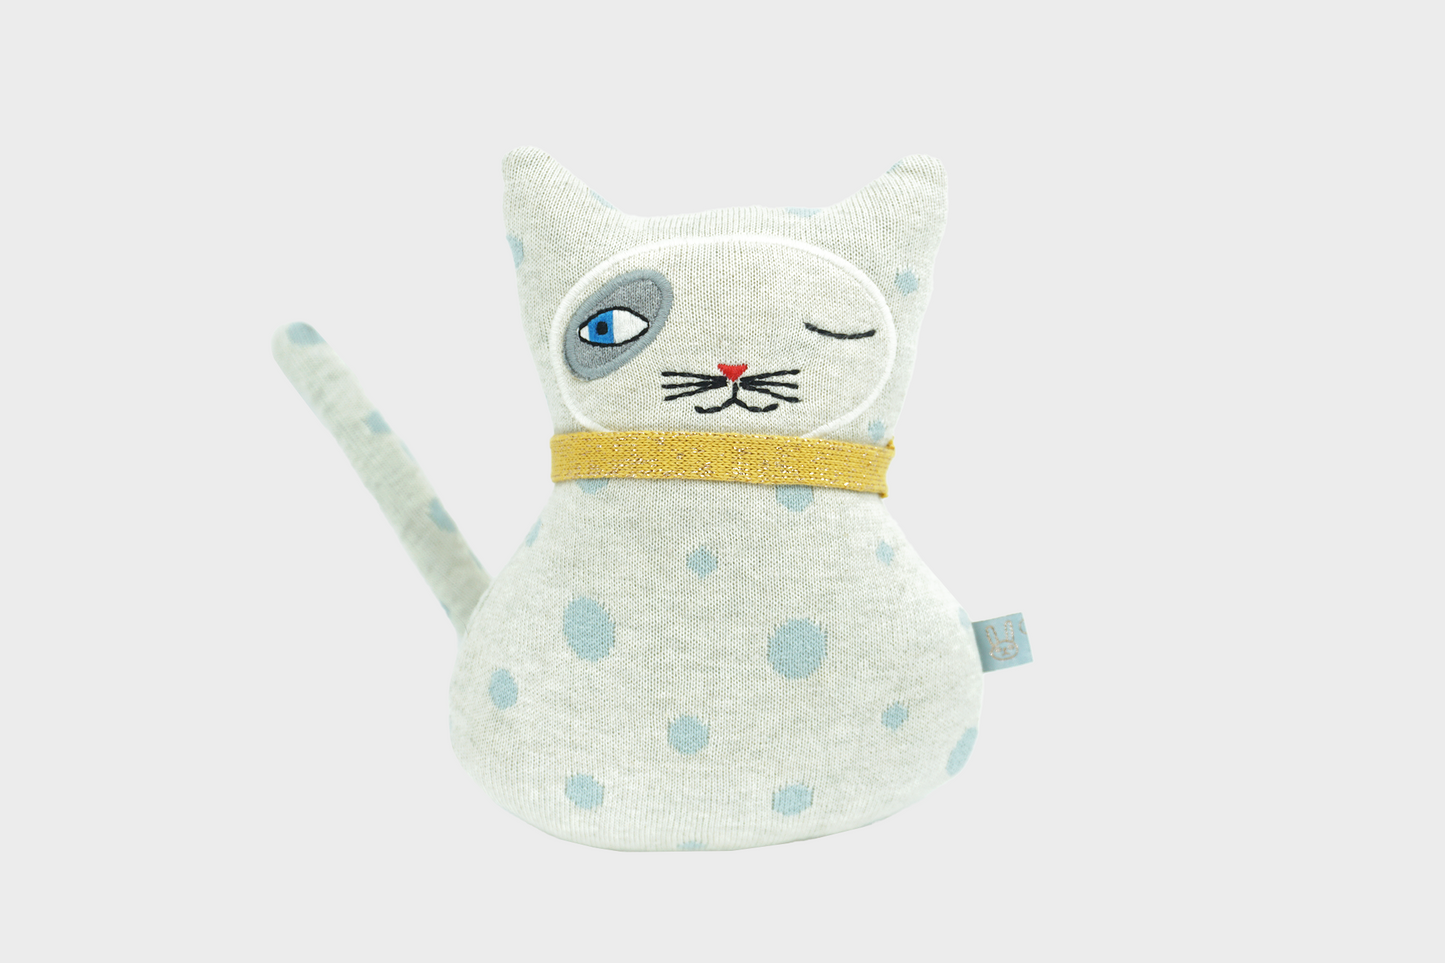 Small polka dotted white cat stuffed animal with yellow collar baby benny cat stufed animal by OYOY